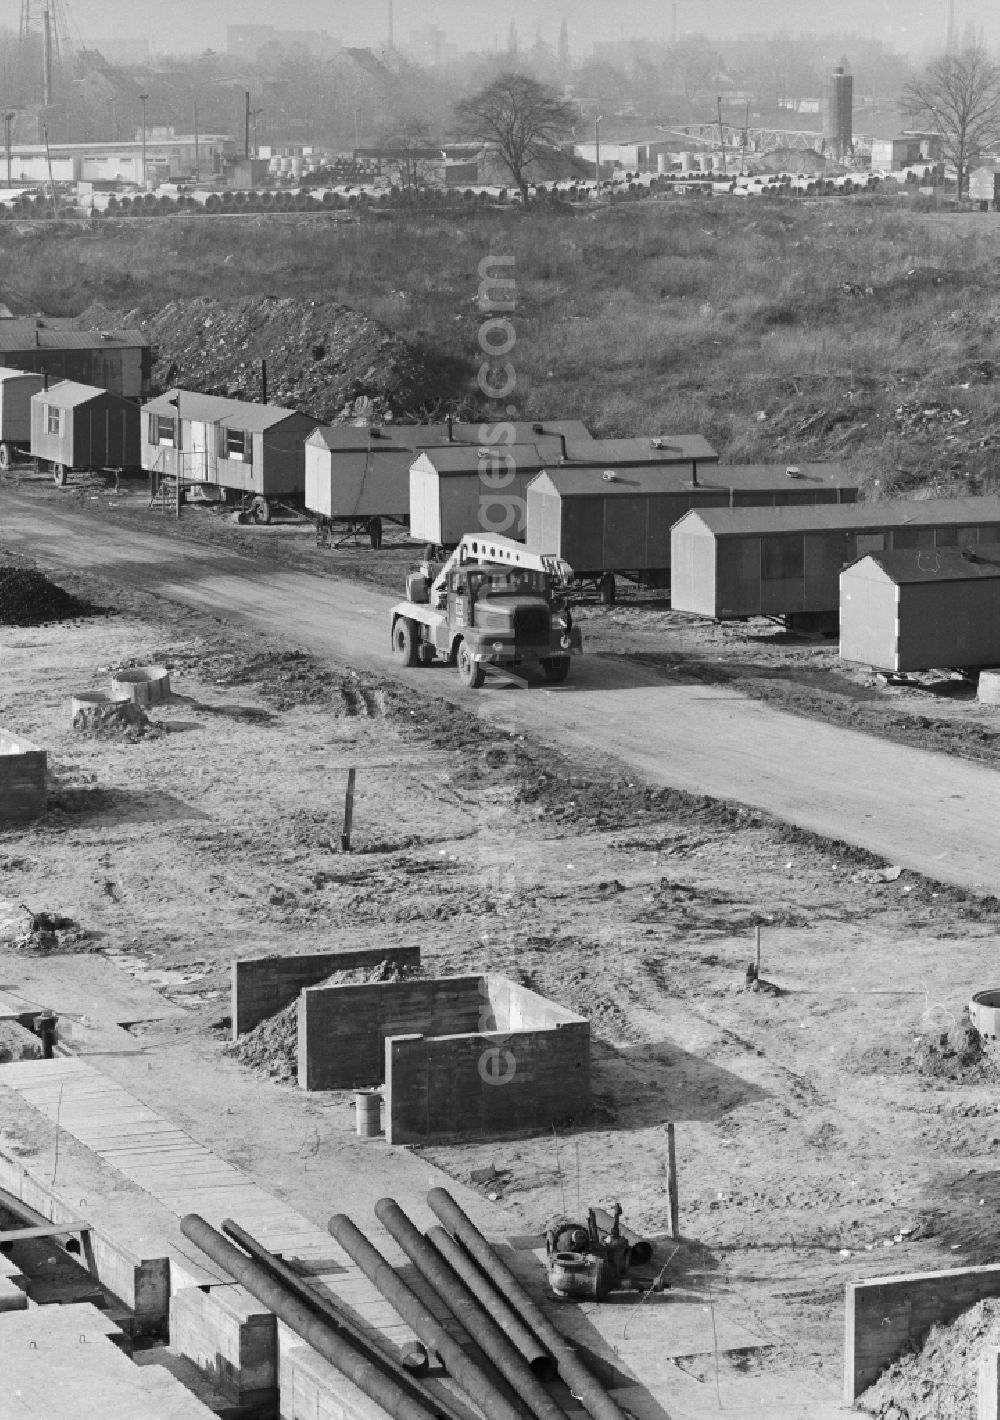 GDR image archive: Berlin - Construction site in the development area in Berlin Hohenschoenhausen, the former capital of the GDR, the German Democratic Republic